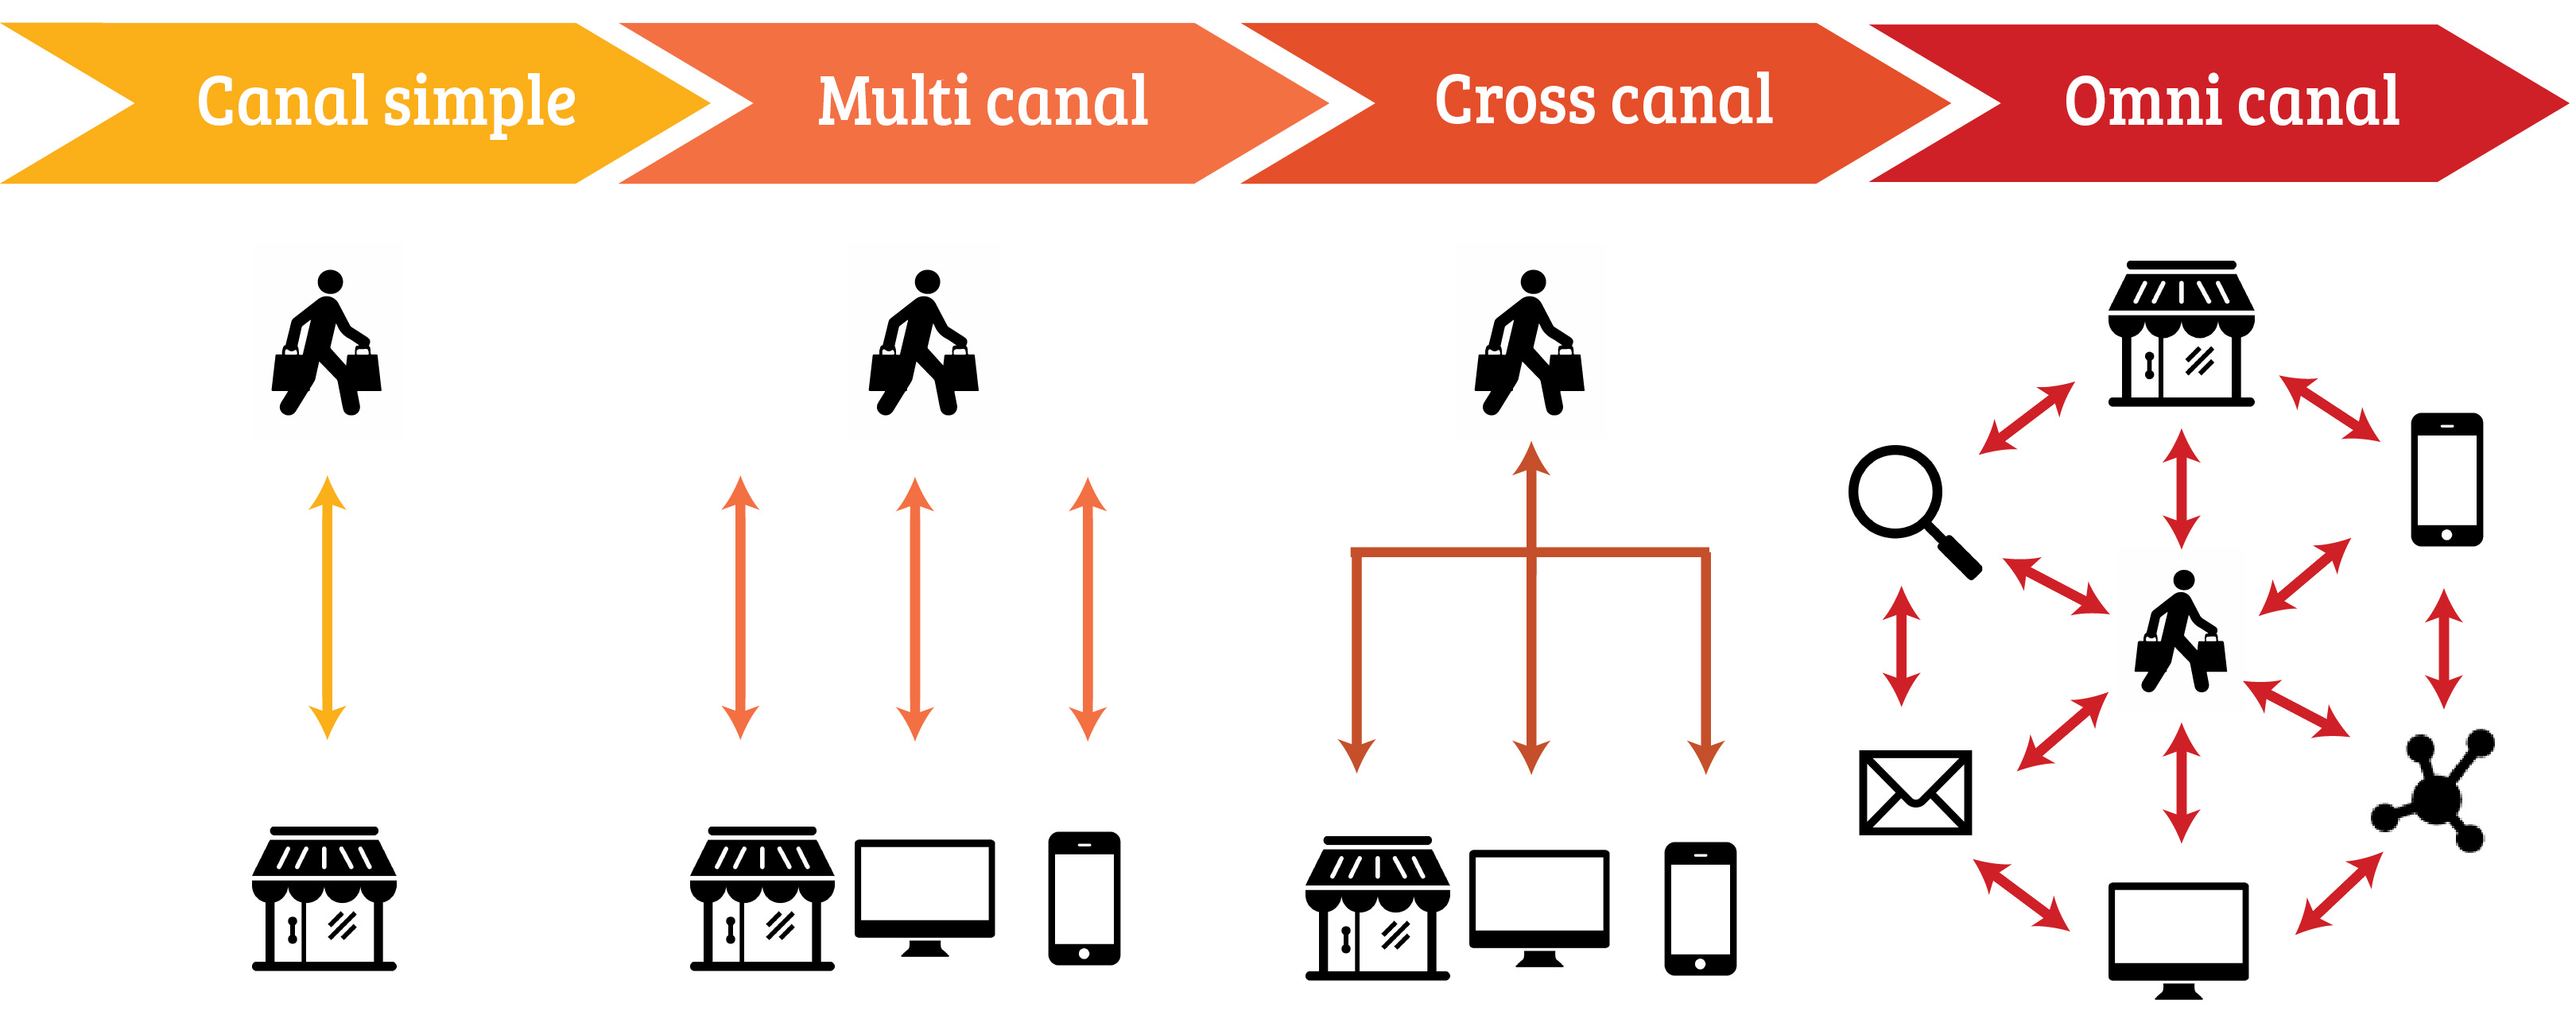 parcours-multicanal-crosscanal-omnicanal